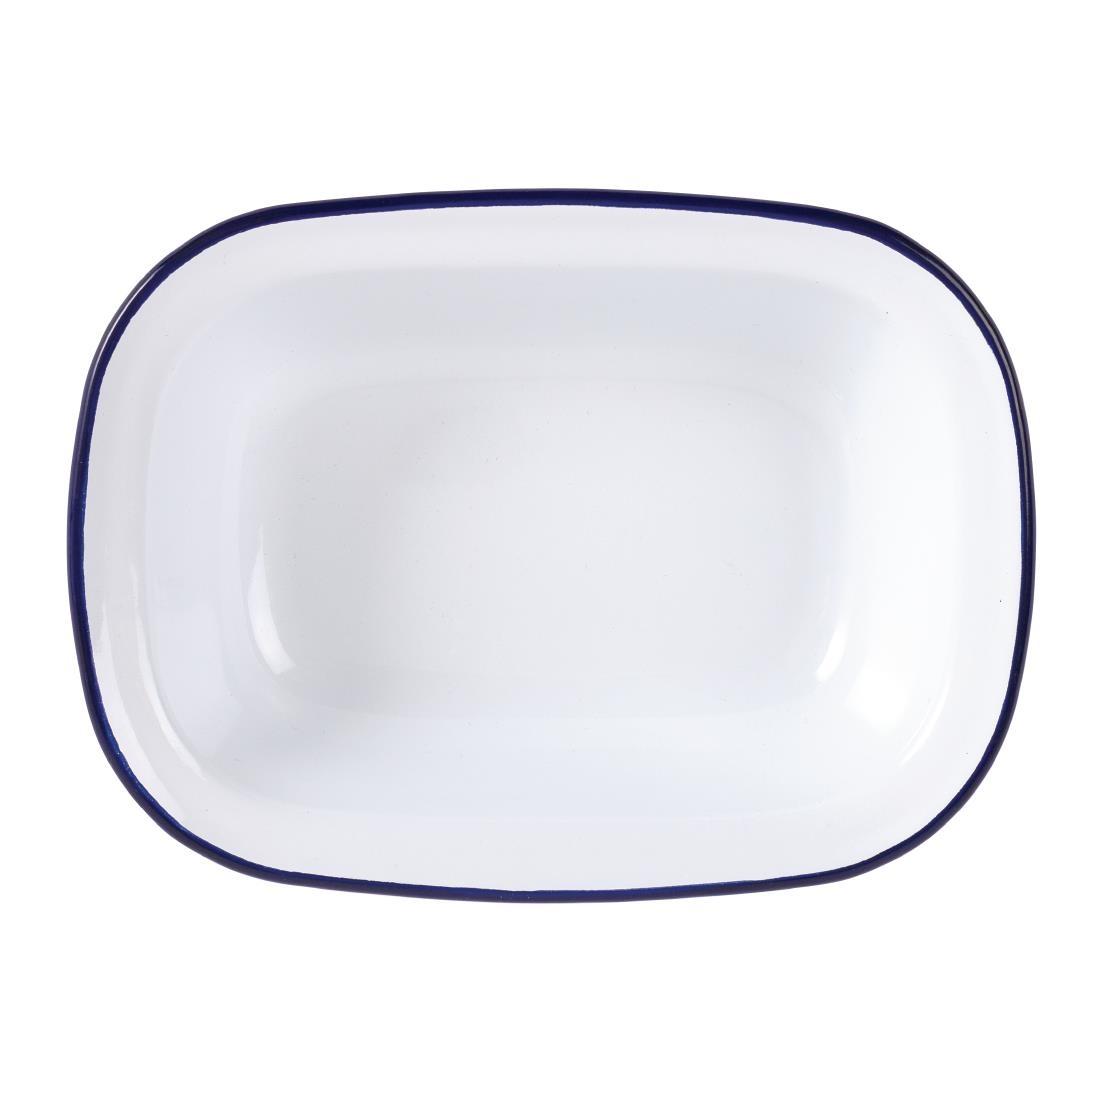 Olympia Enamel Dishes Rectangular 280 x 190mm (Pack of 6) - GM510  - 4